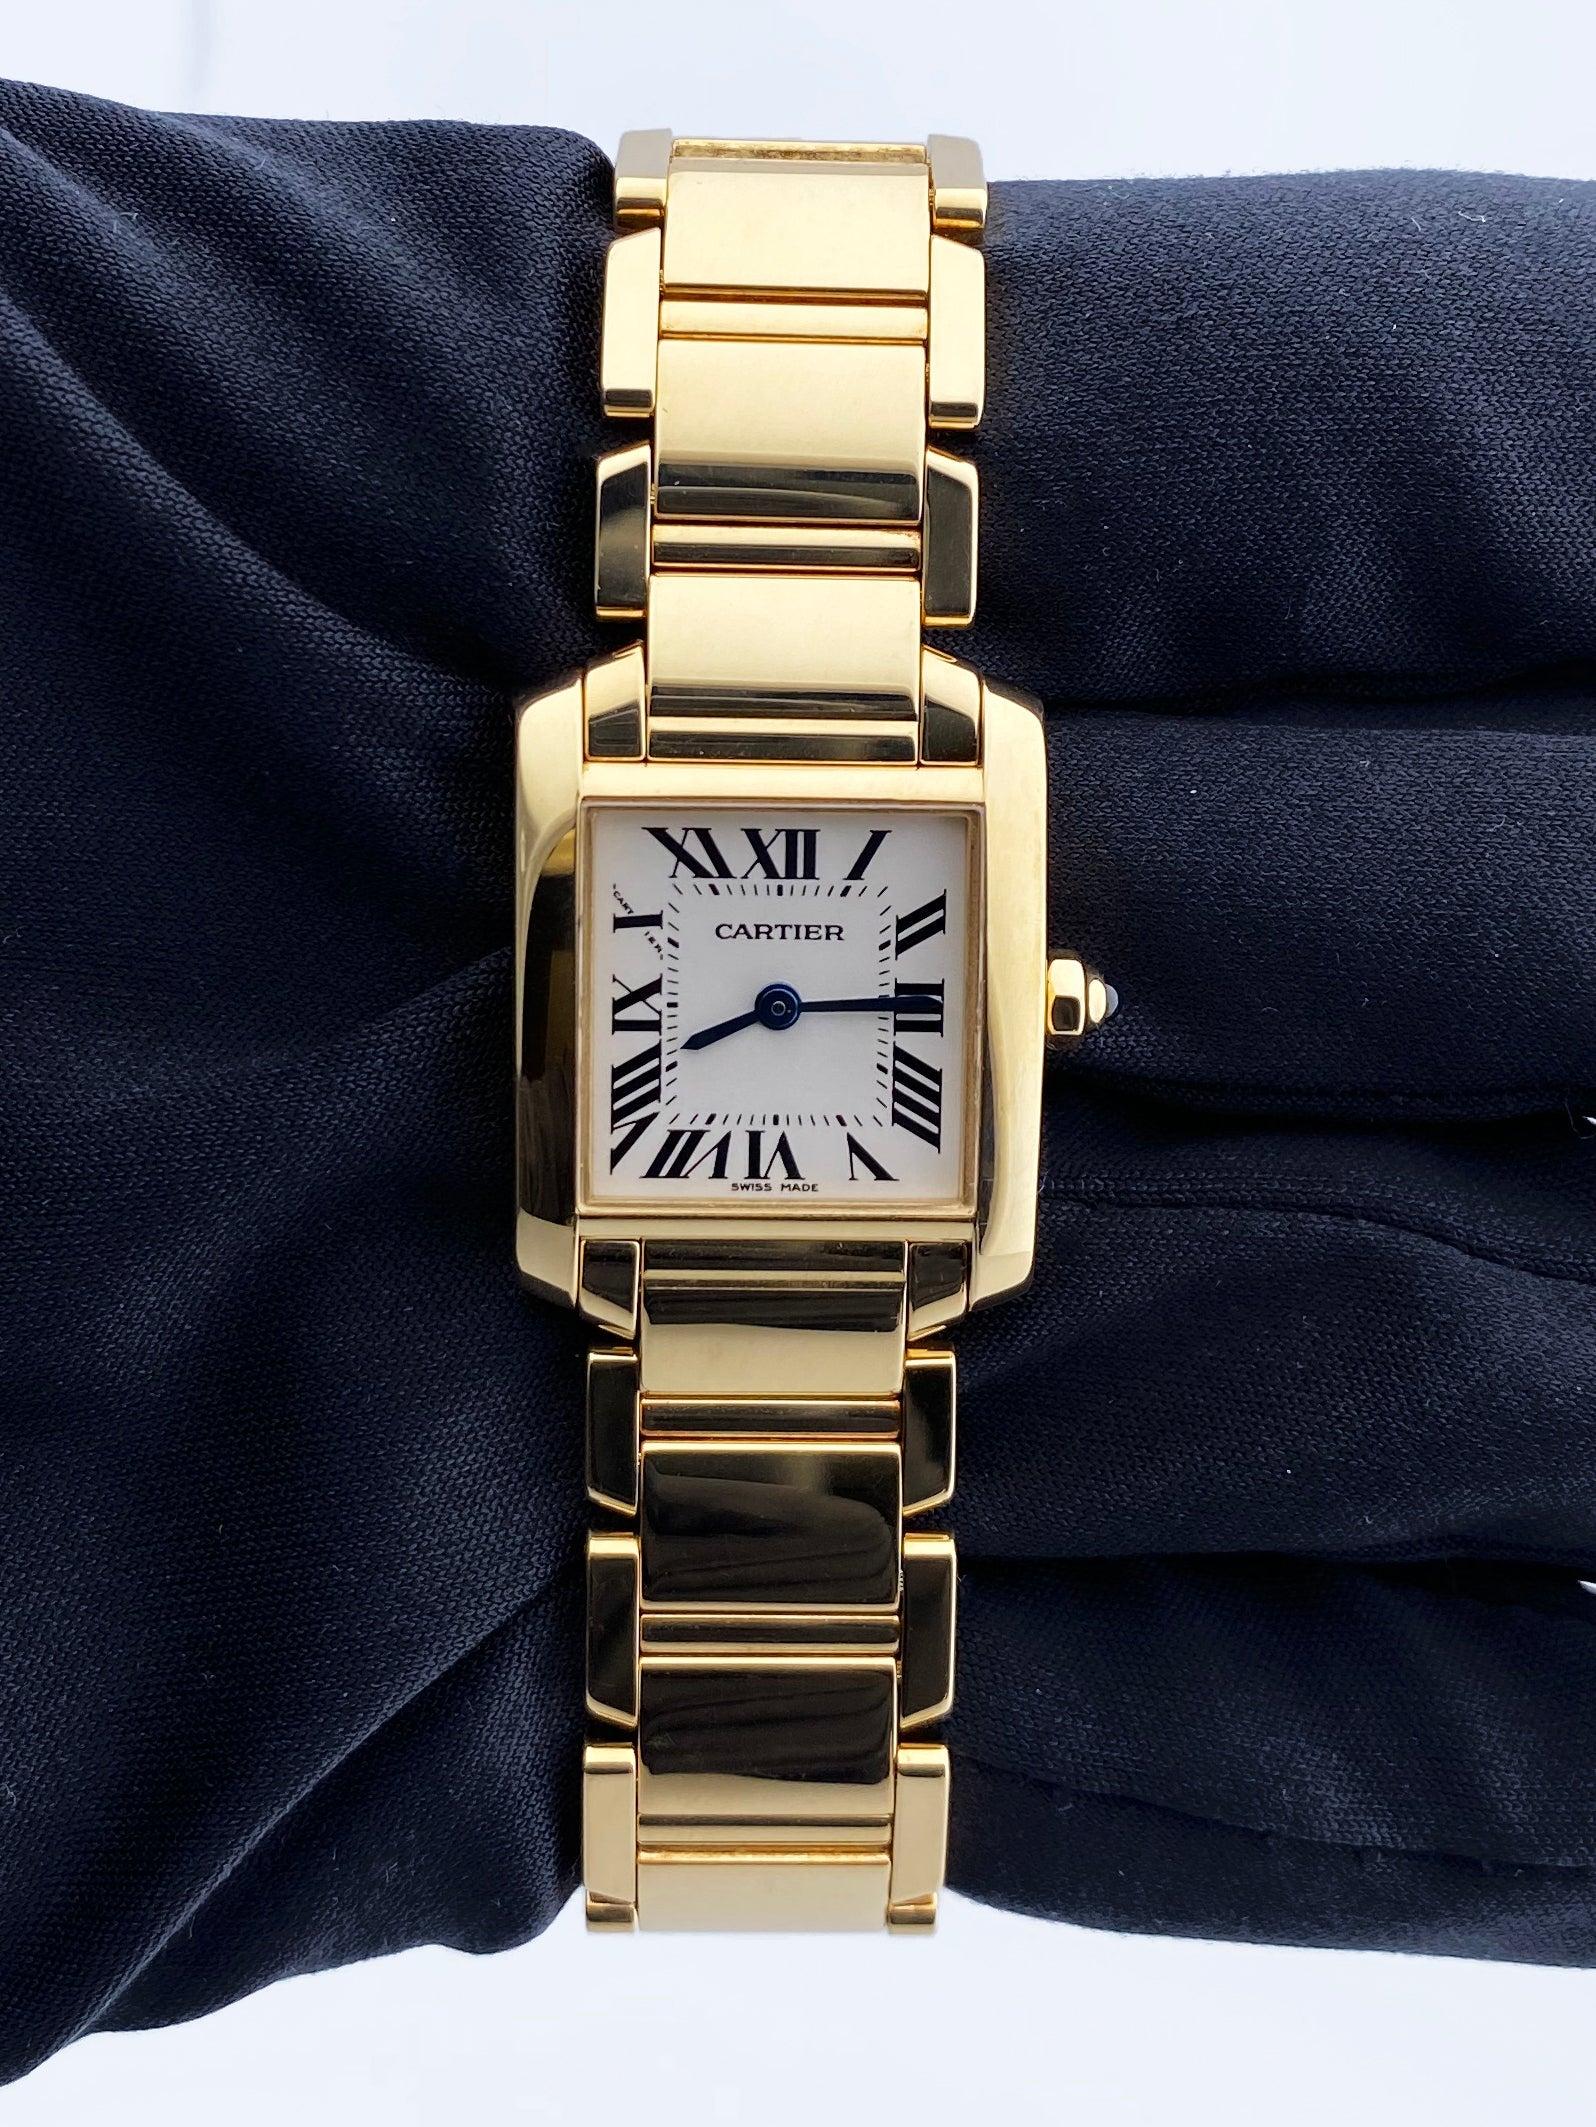 Cartier Tank Francaise 2385 Ladies Watch. 20mm 18k yellow gold case with 18K yellow gold bezel. Off-White dial with Blue steel hands and Roman numeral hour markers. Minute markers on the inner dial. 18K yellow gold bracelet with hidden butterfly.